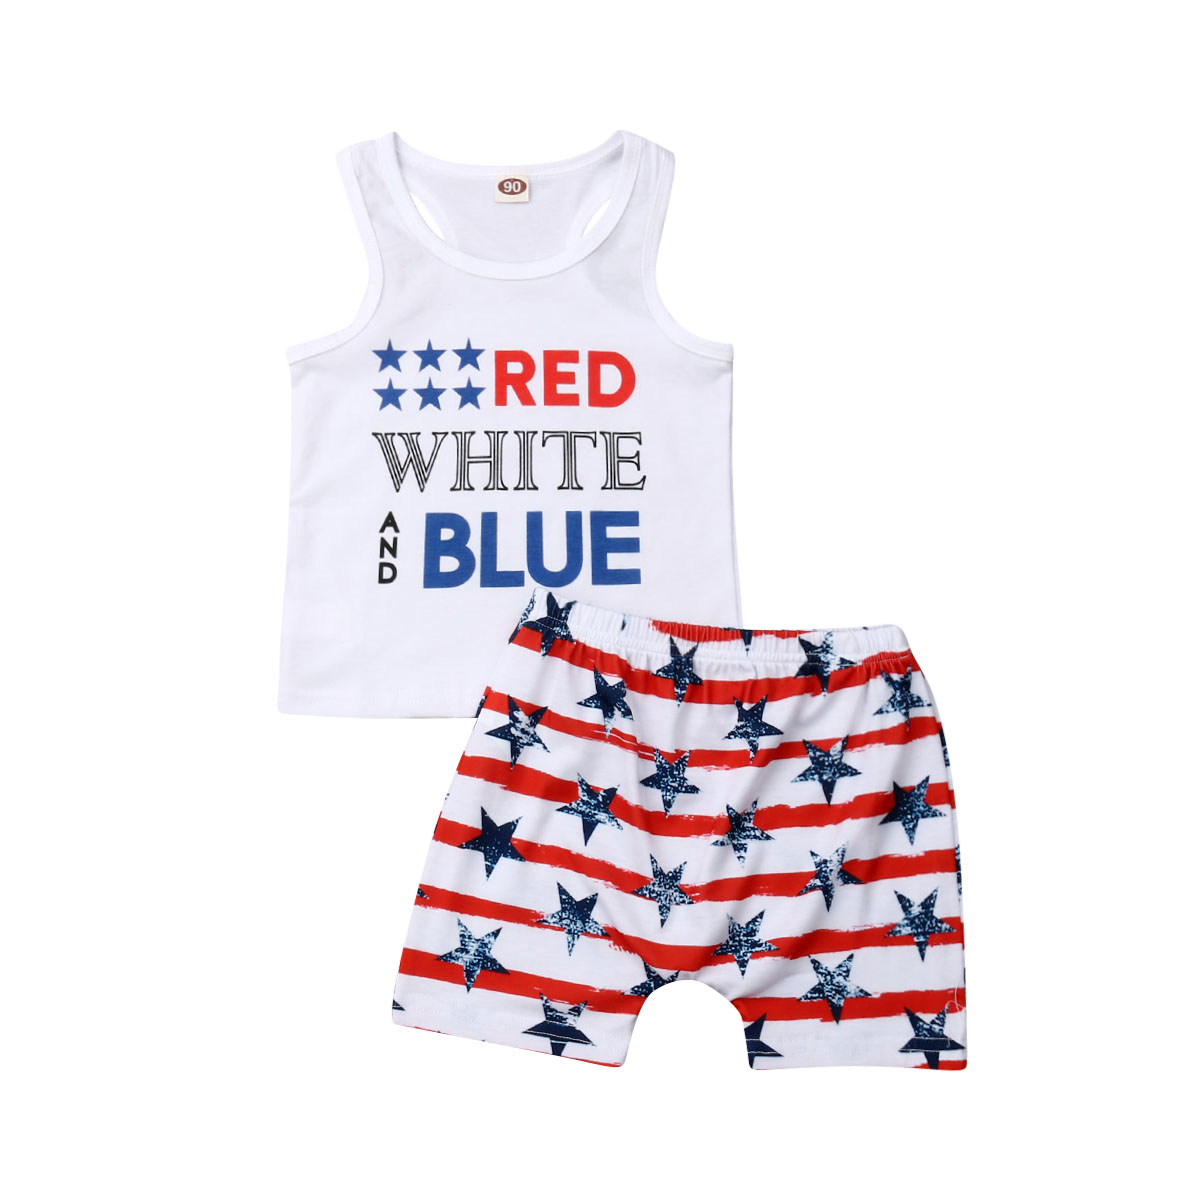 4th of July Baby Boy Outfits shirt Independence Day Tank Tops Infant toddler boys sleeveless shirt shorts 2set